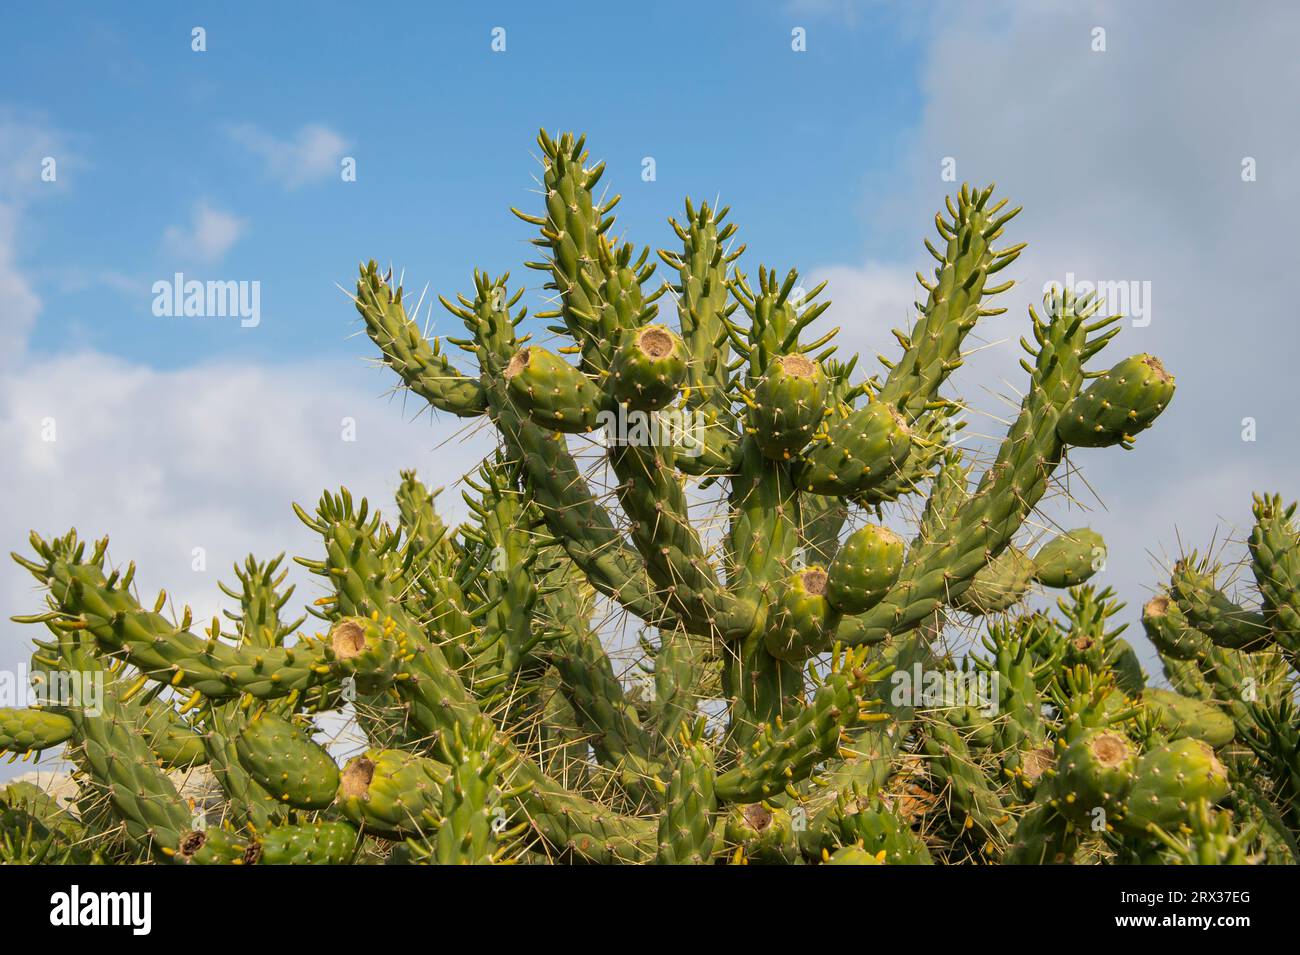 Spikey wild cactus against a blue sky background Stock Photo